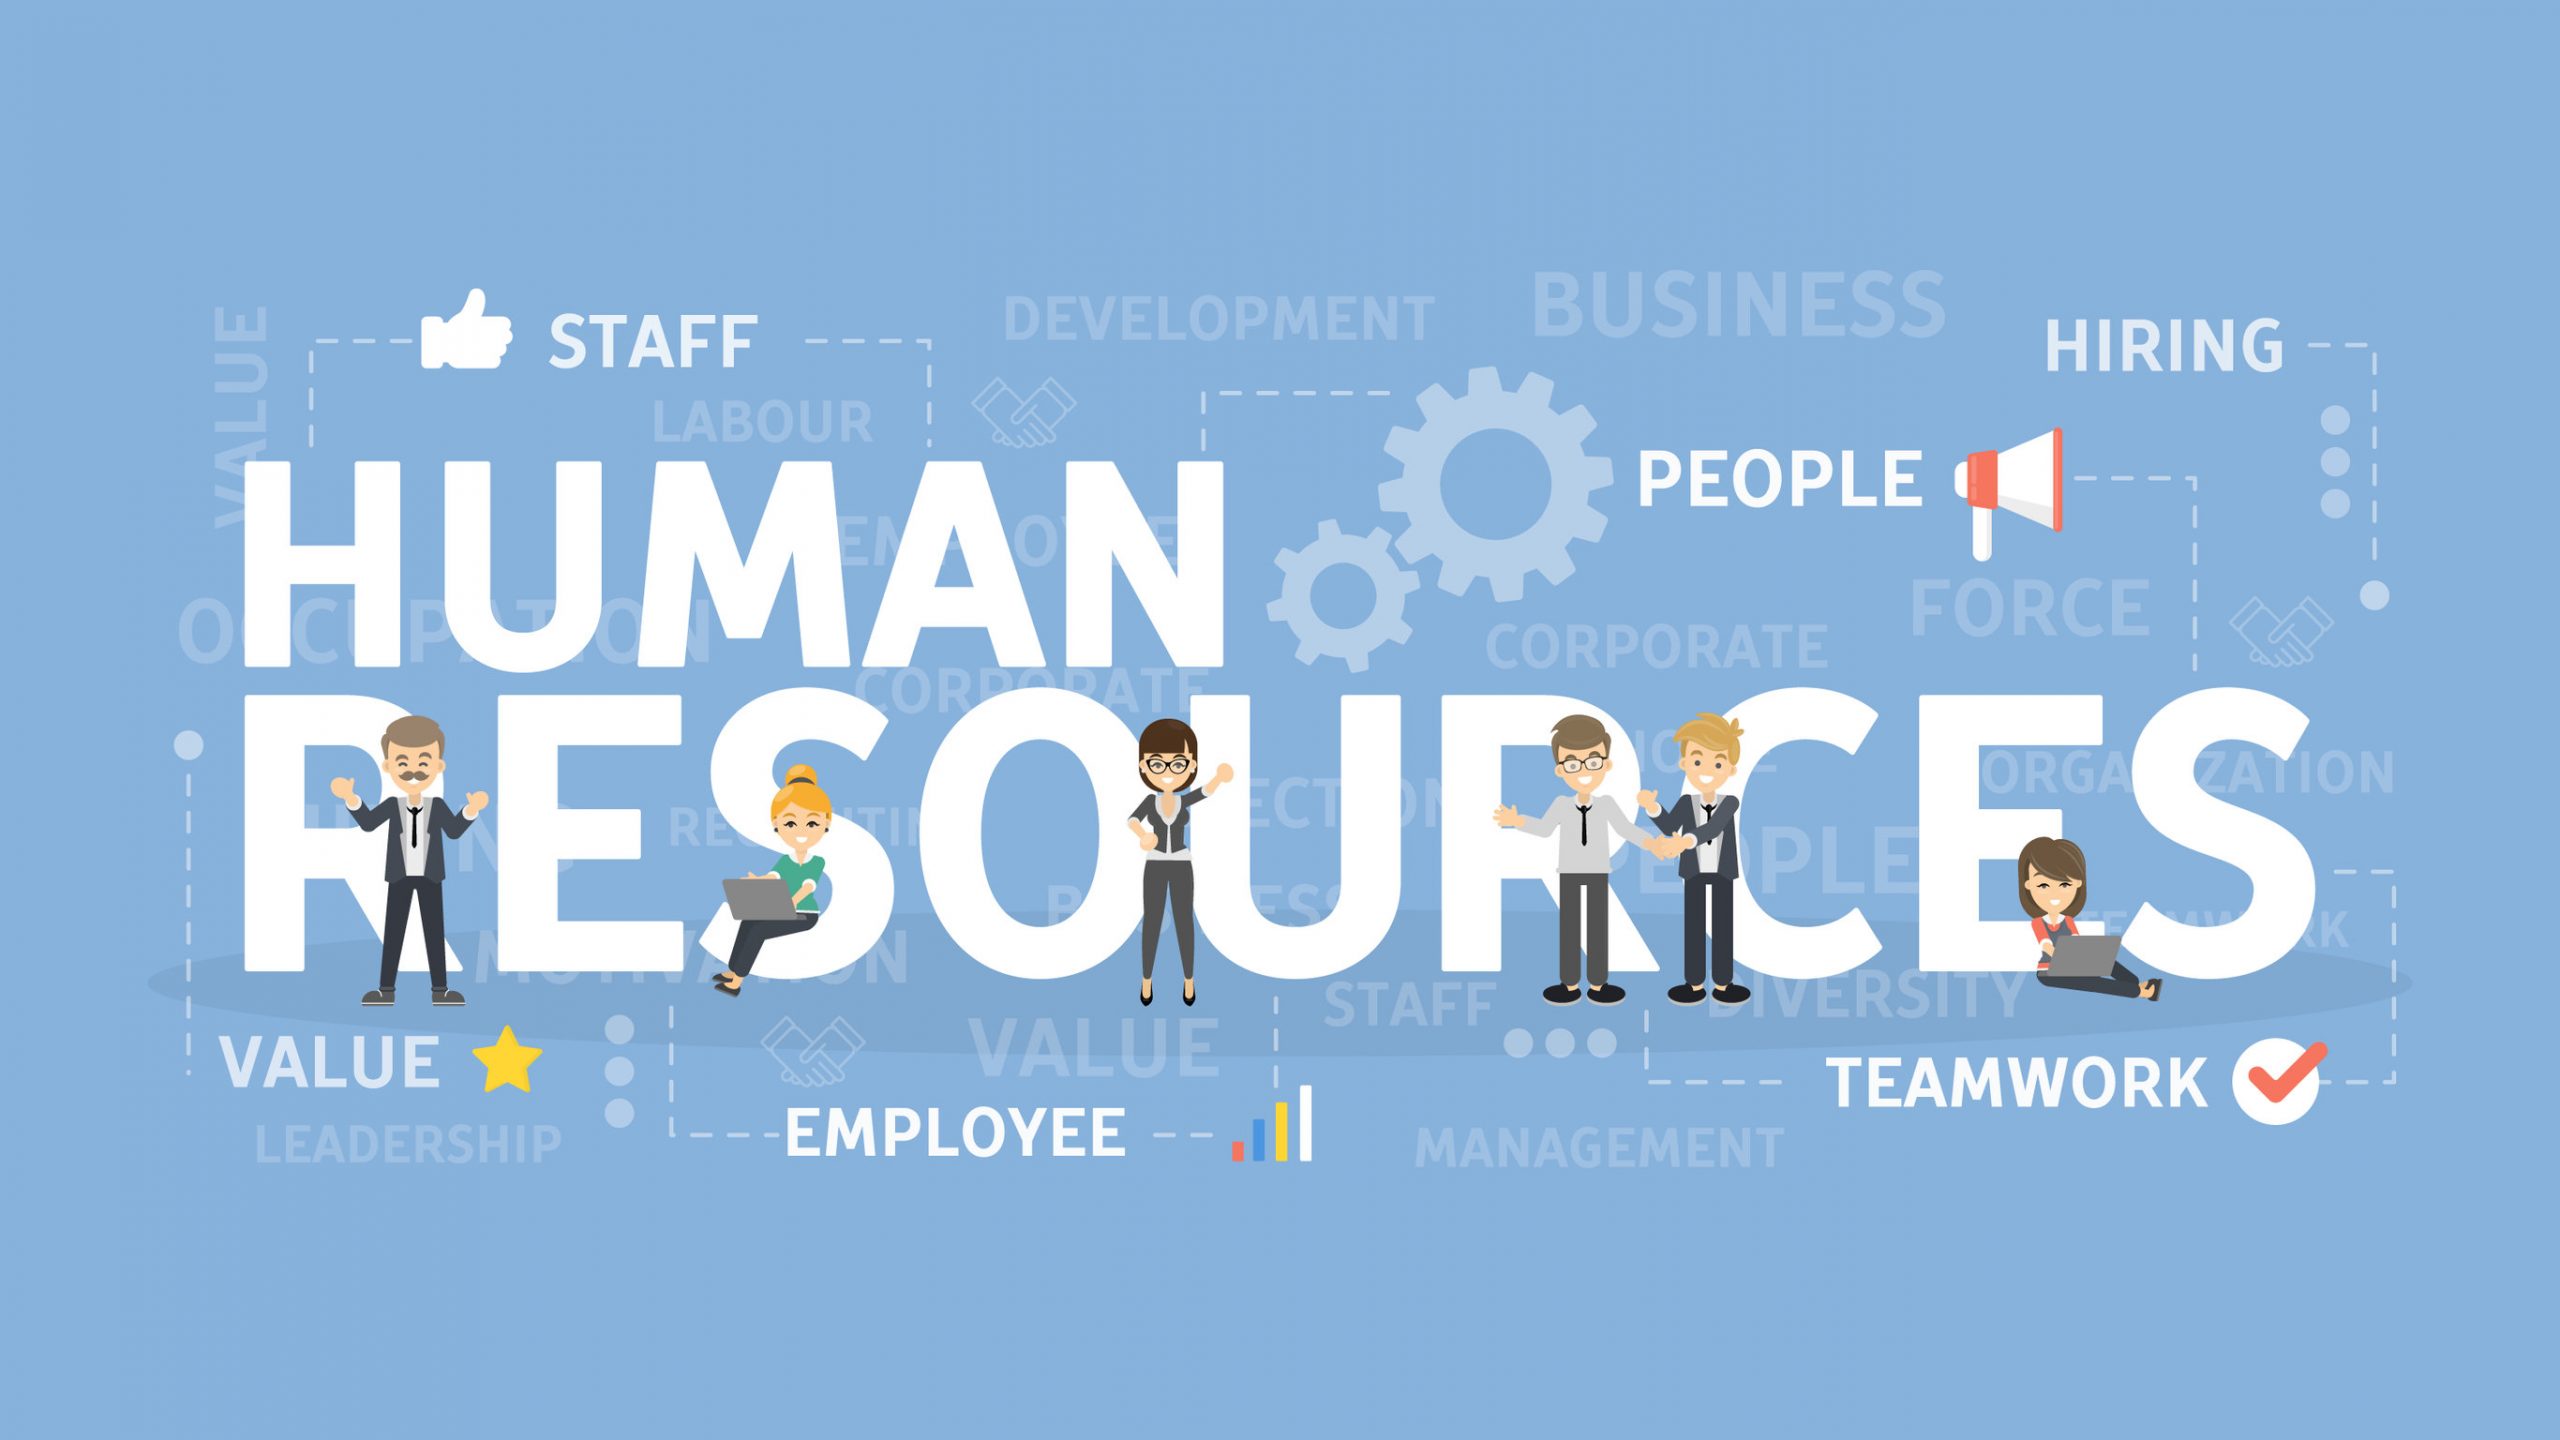 Outsource human resources